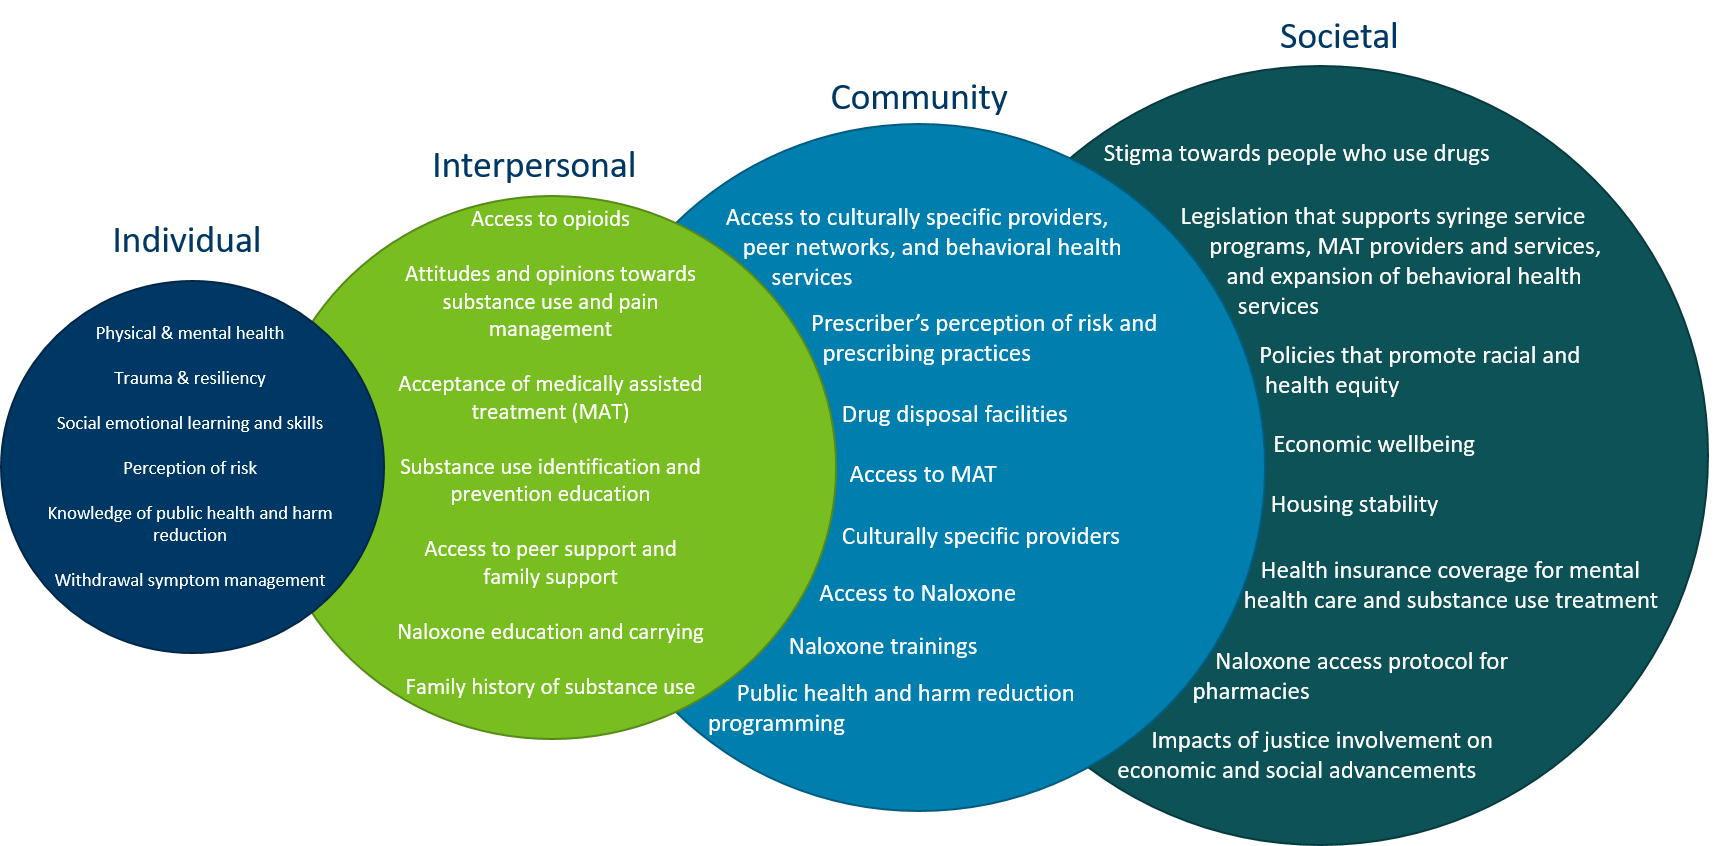 Factors on multiple levels of an individuals life influence substance use.